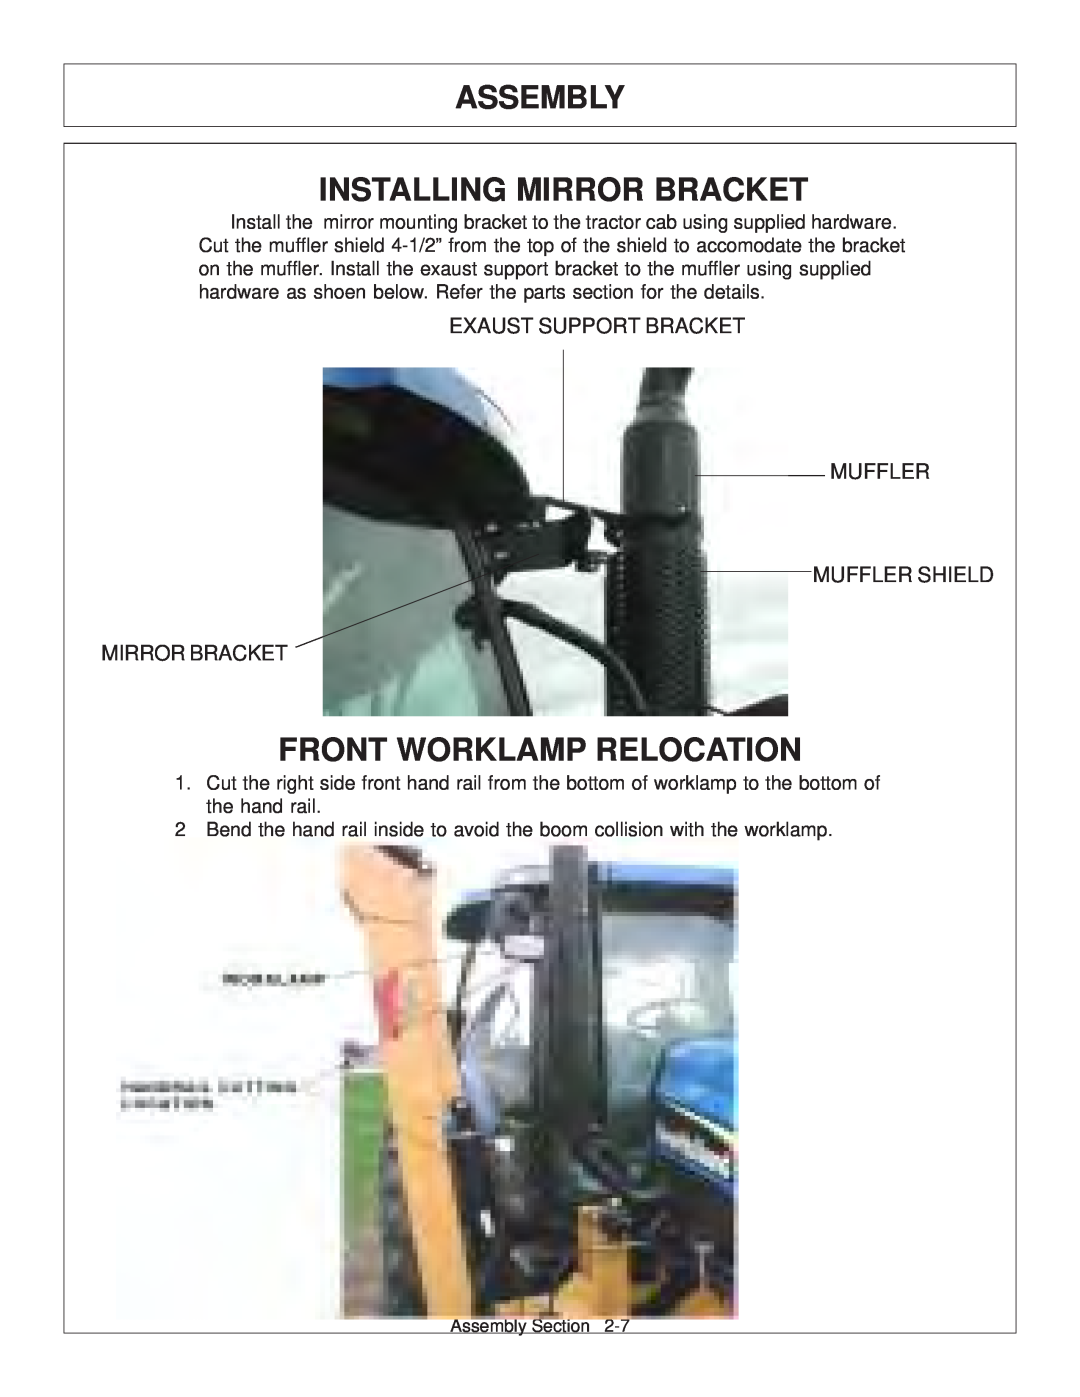 Tiger Products Co., Ltd 6020009 manual Assembly Installing Mirror Bracket, Front Worklamp Relocation 